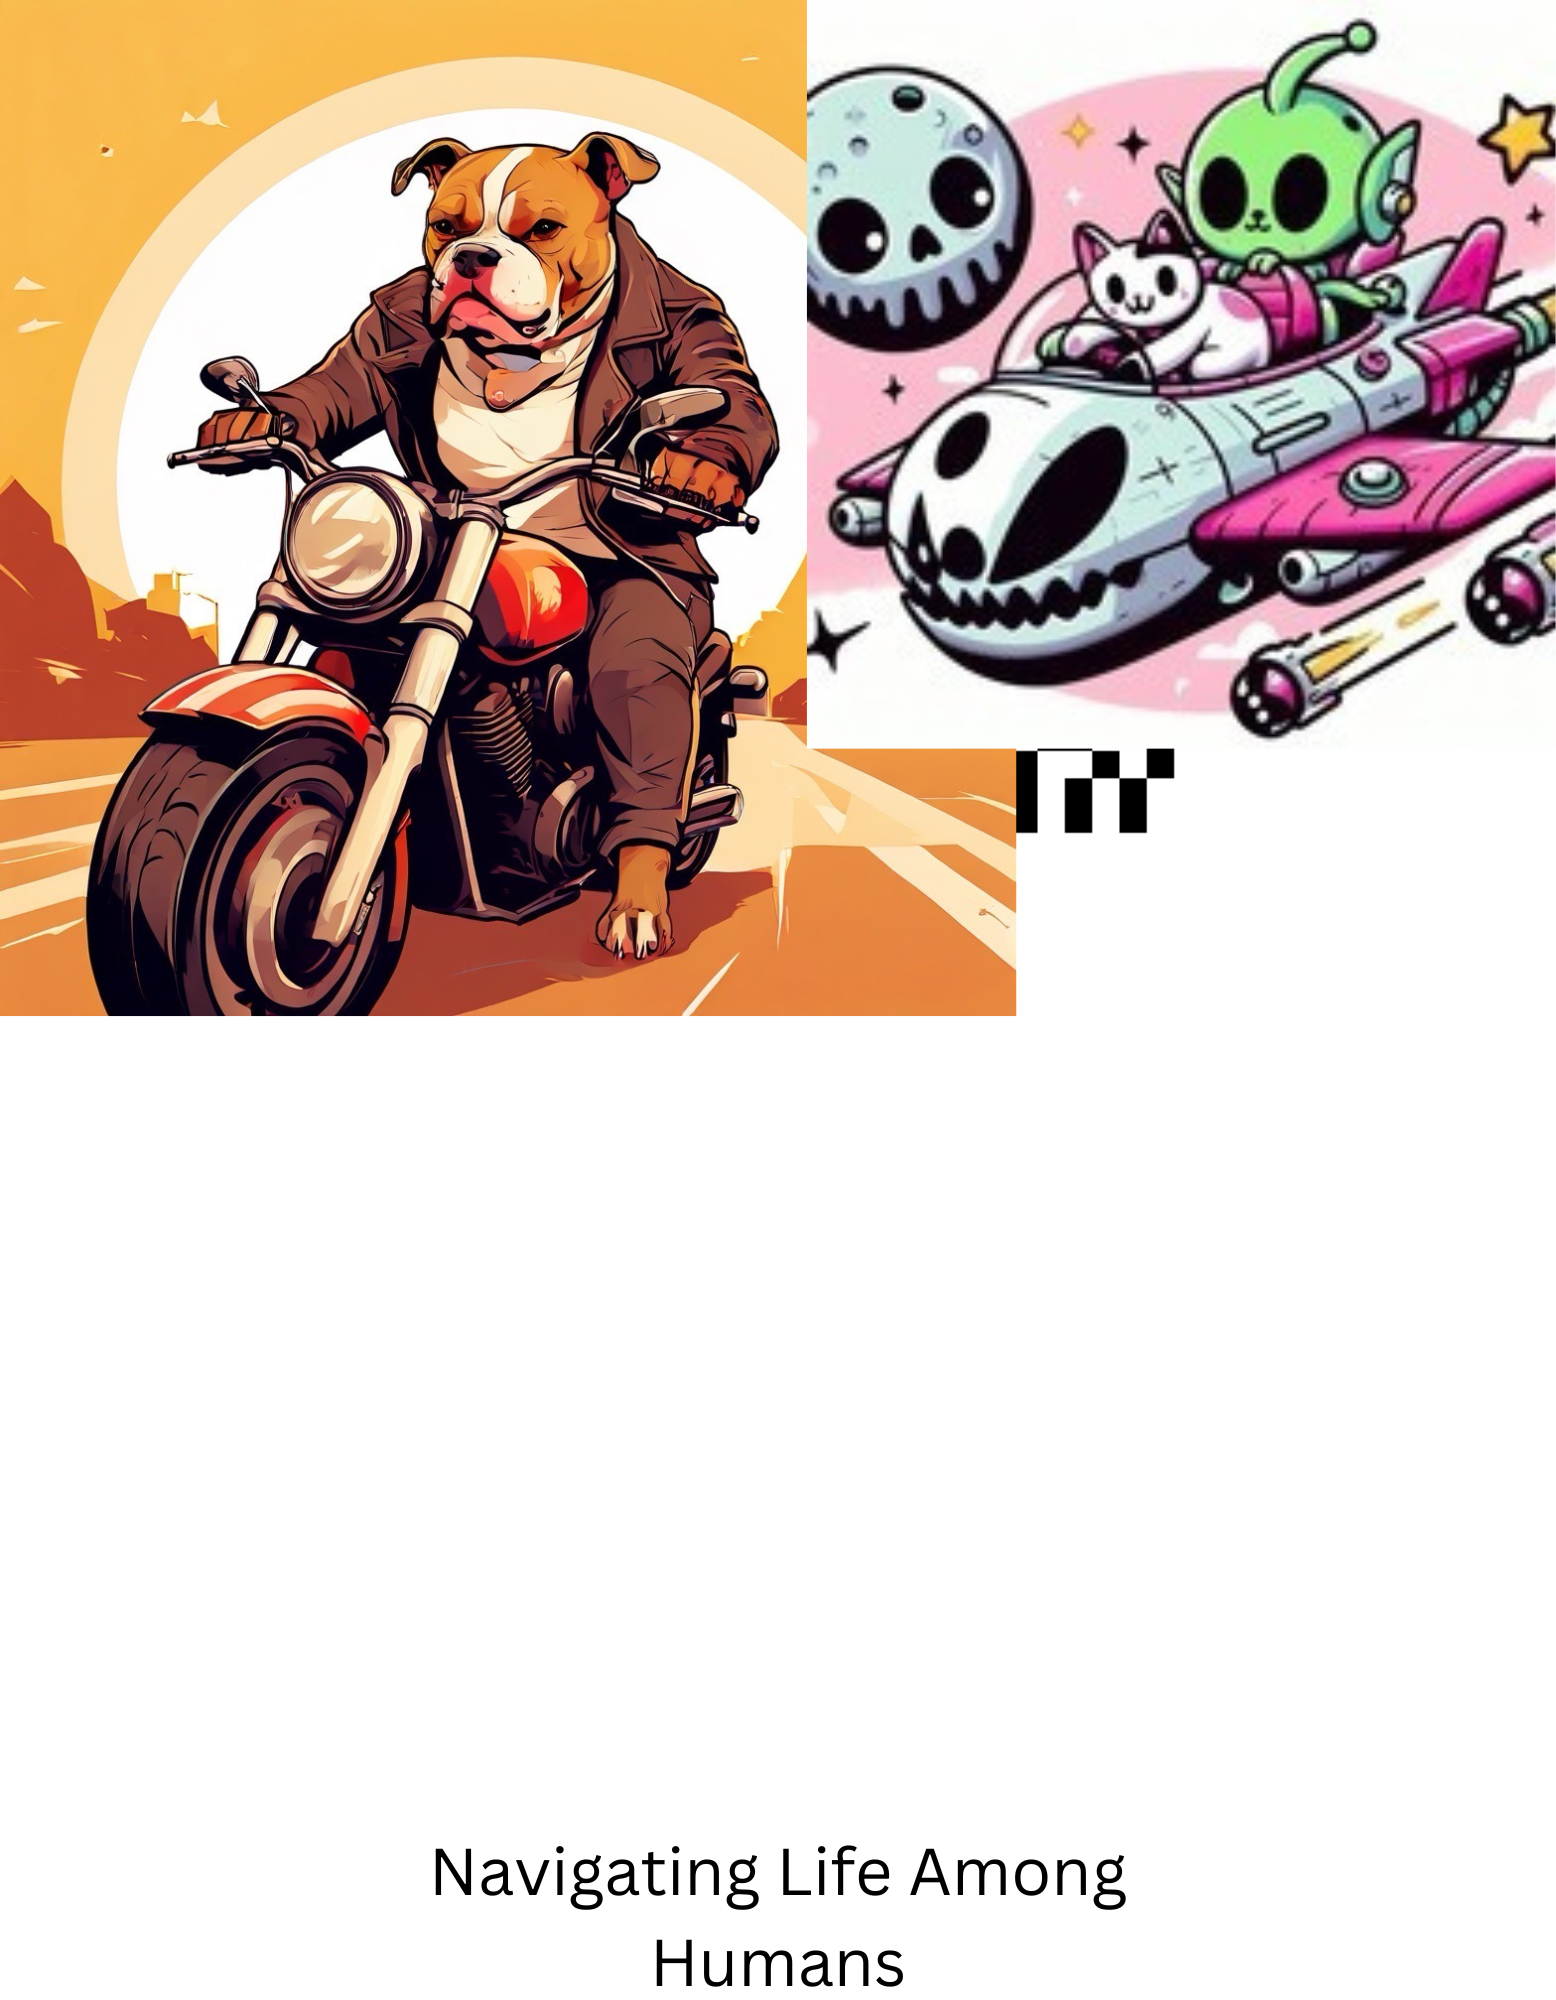 Design for a T-shirt. On the left is a pitbull driving a motorcycle with a city scape in the background. On the right is a cat and an alien riding in a spaceship. The text at the bottom reads: Navigating life among humans.